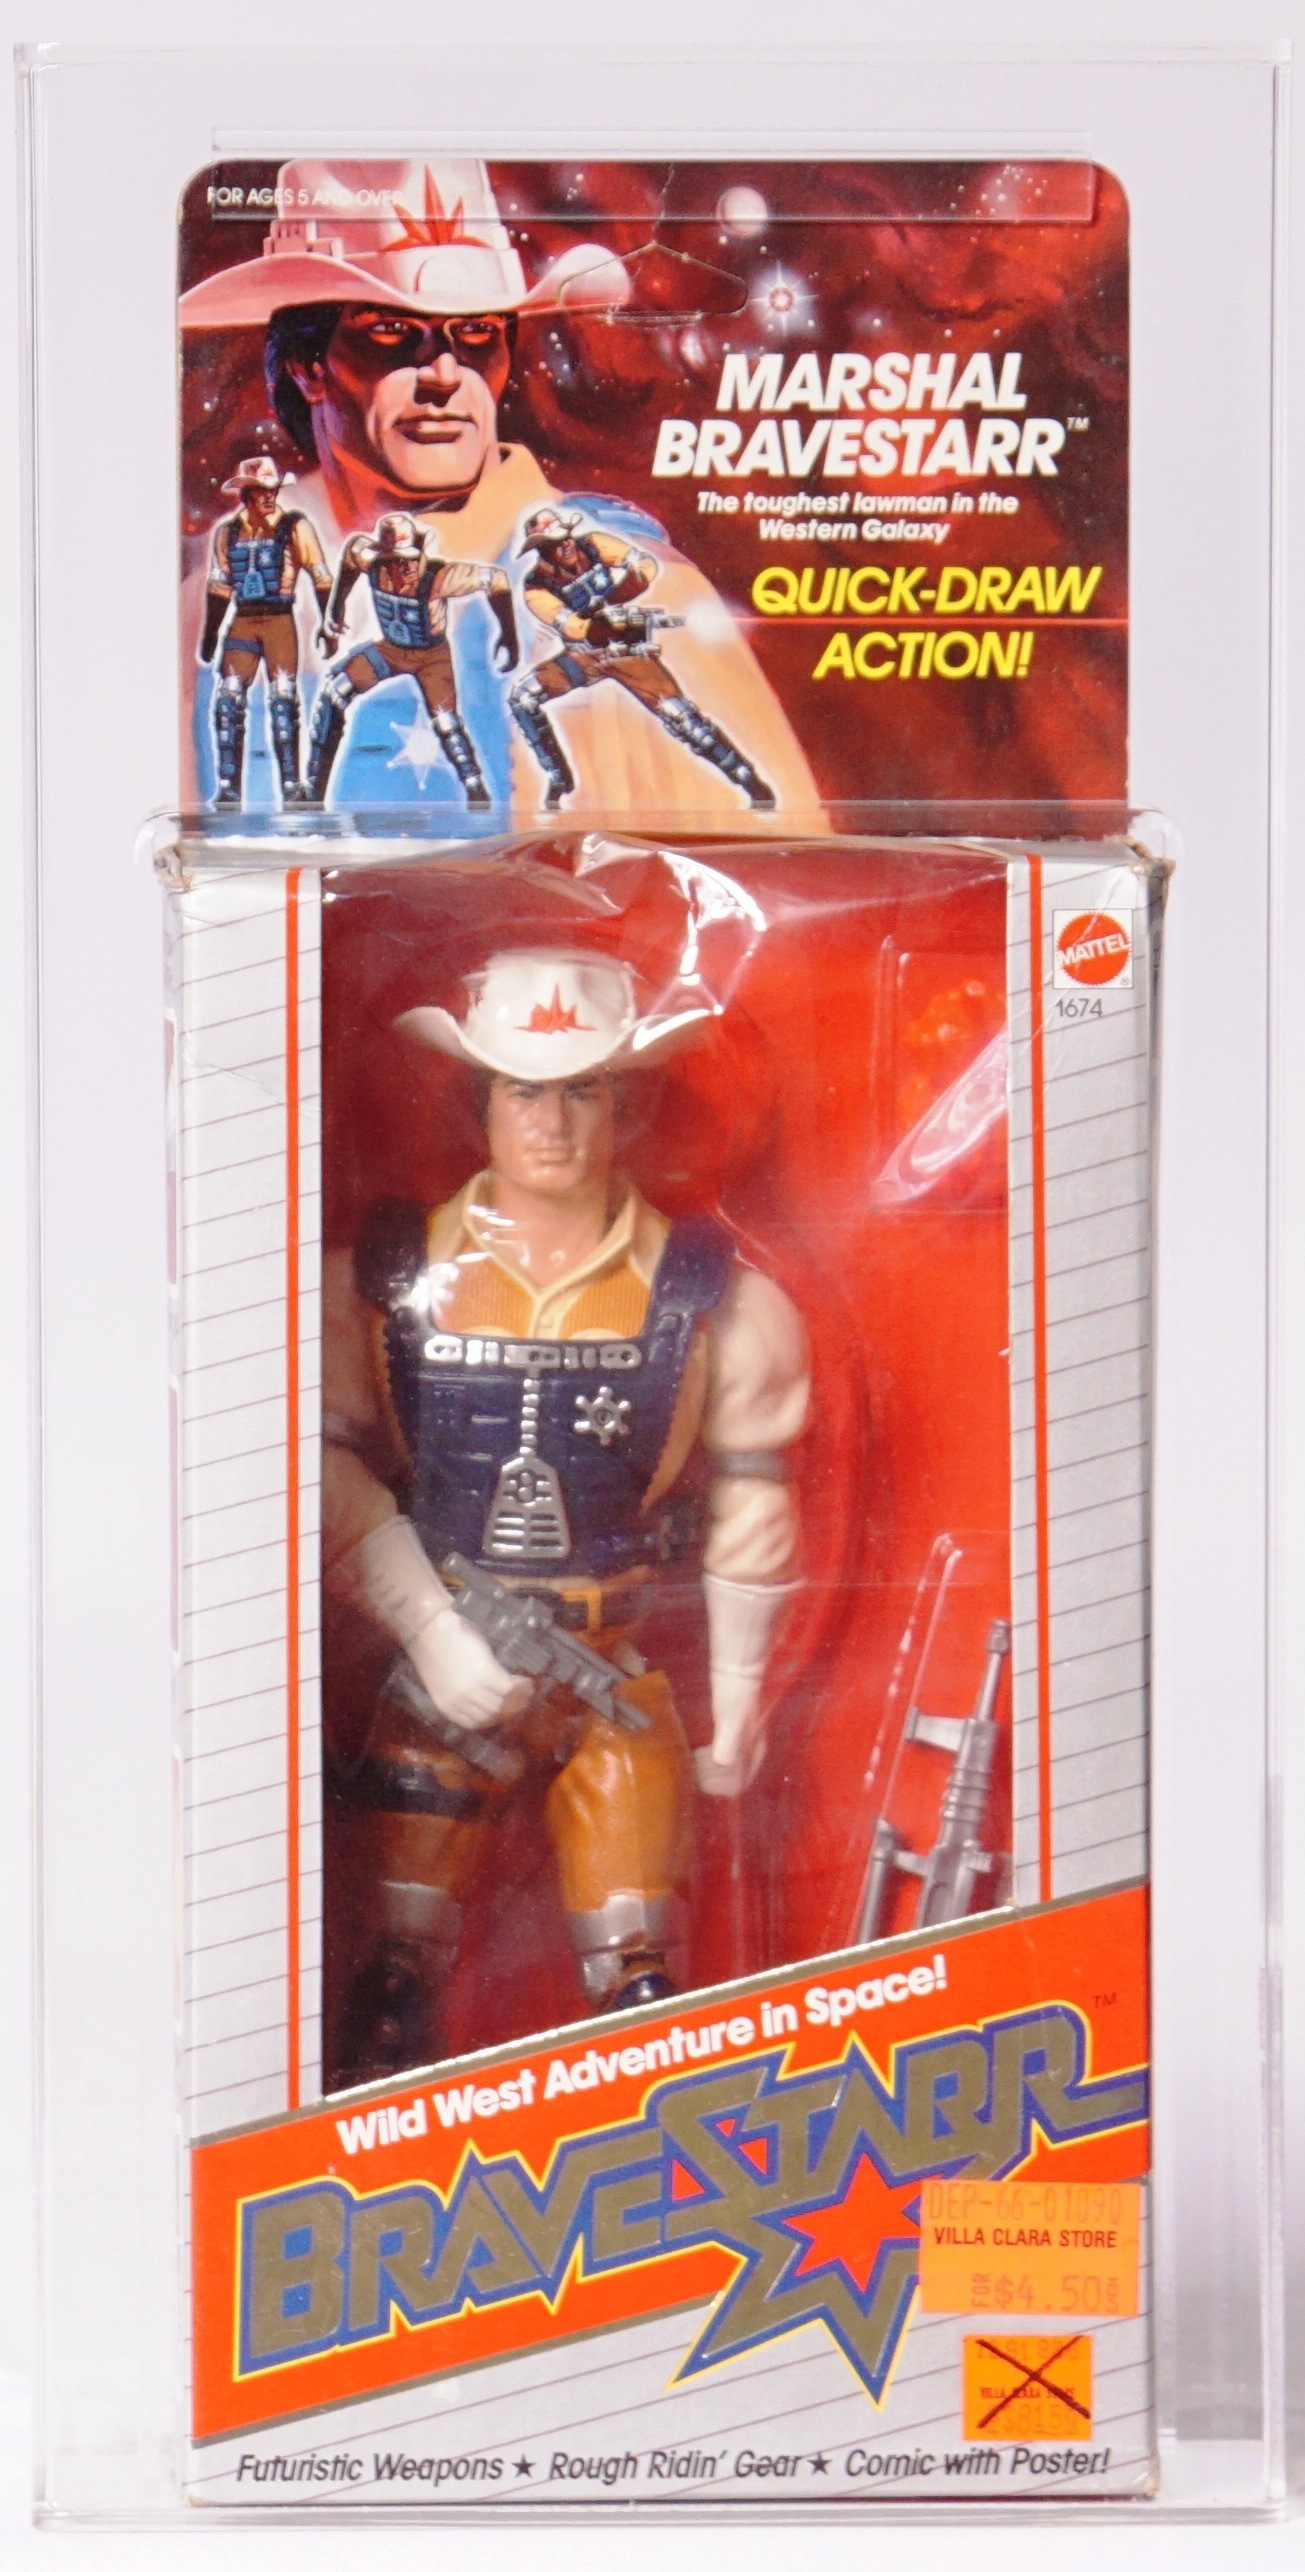 New retro 80s Bravestarr action figure revealed by dasin toys preorder info  